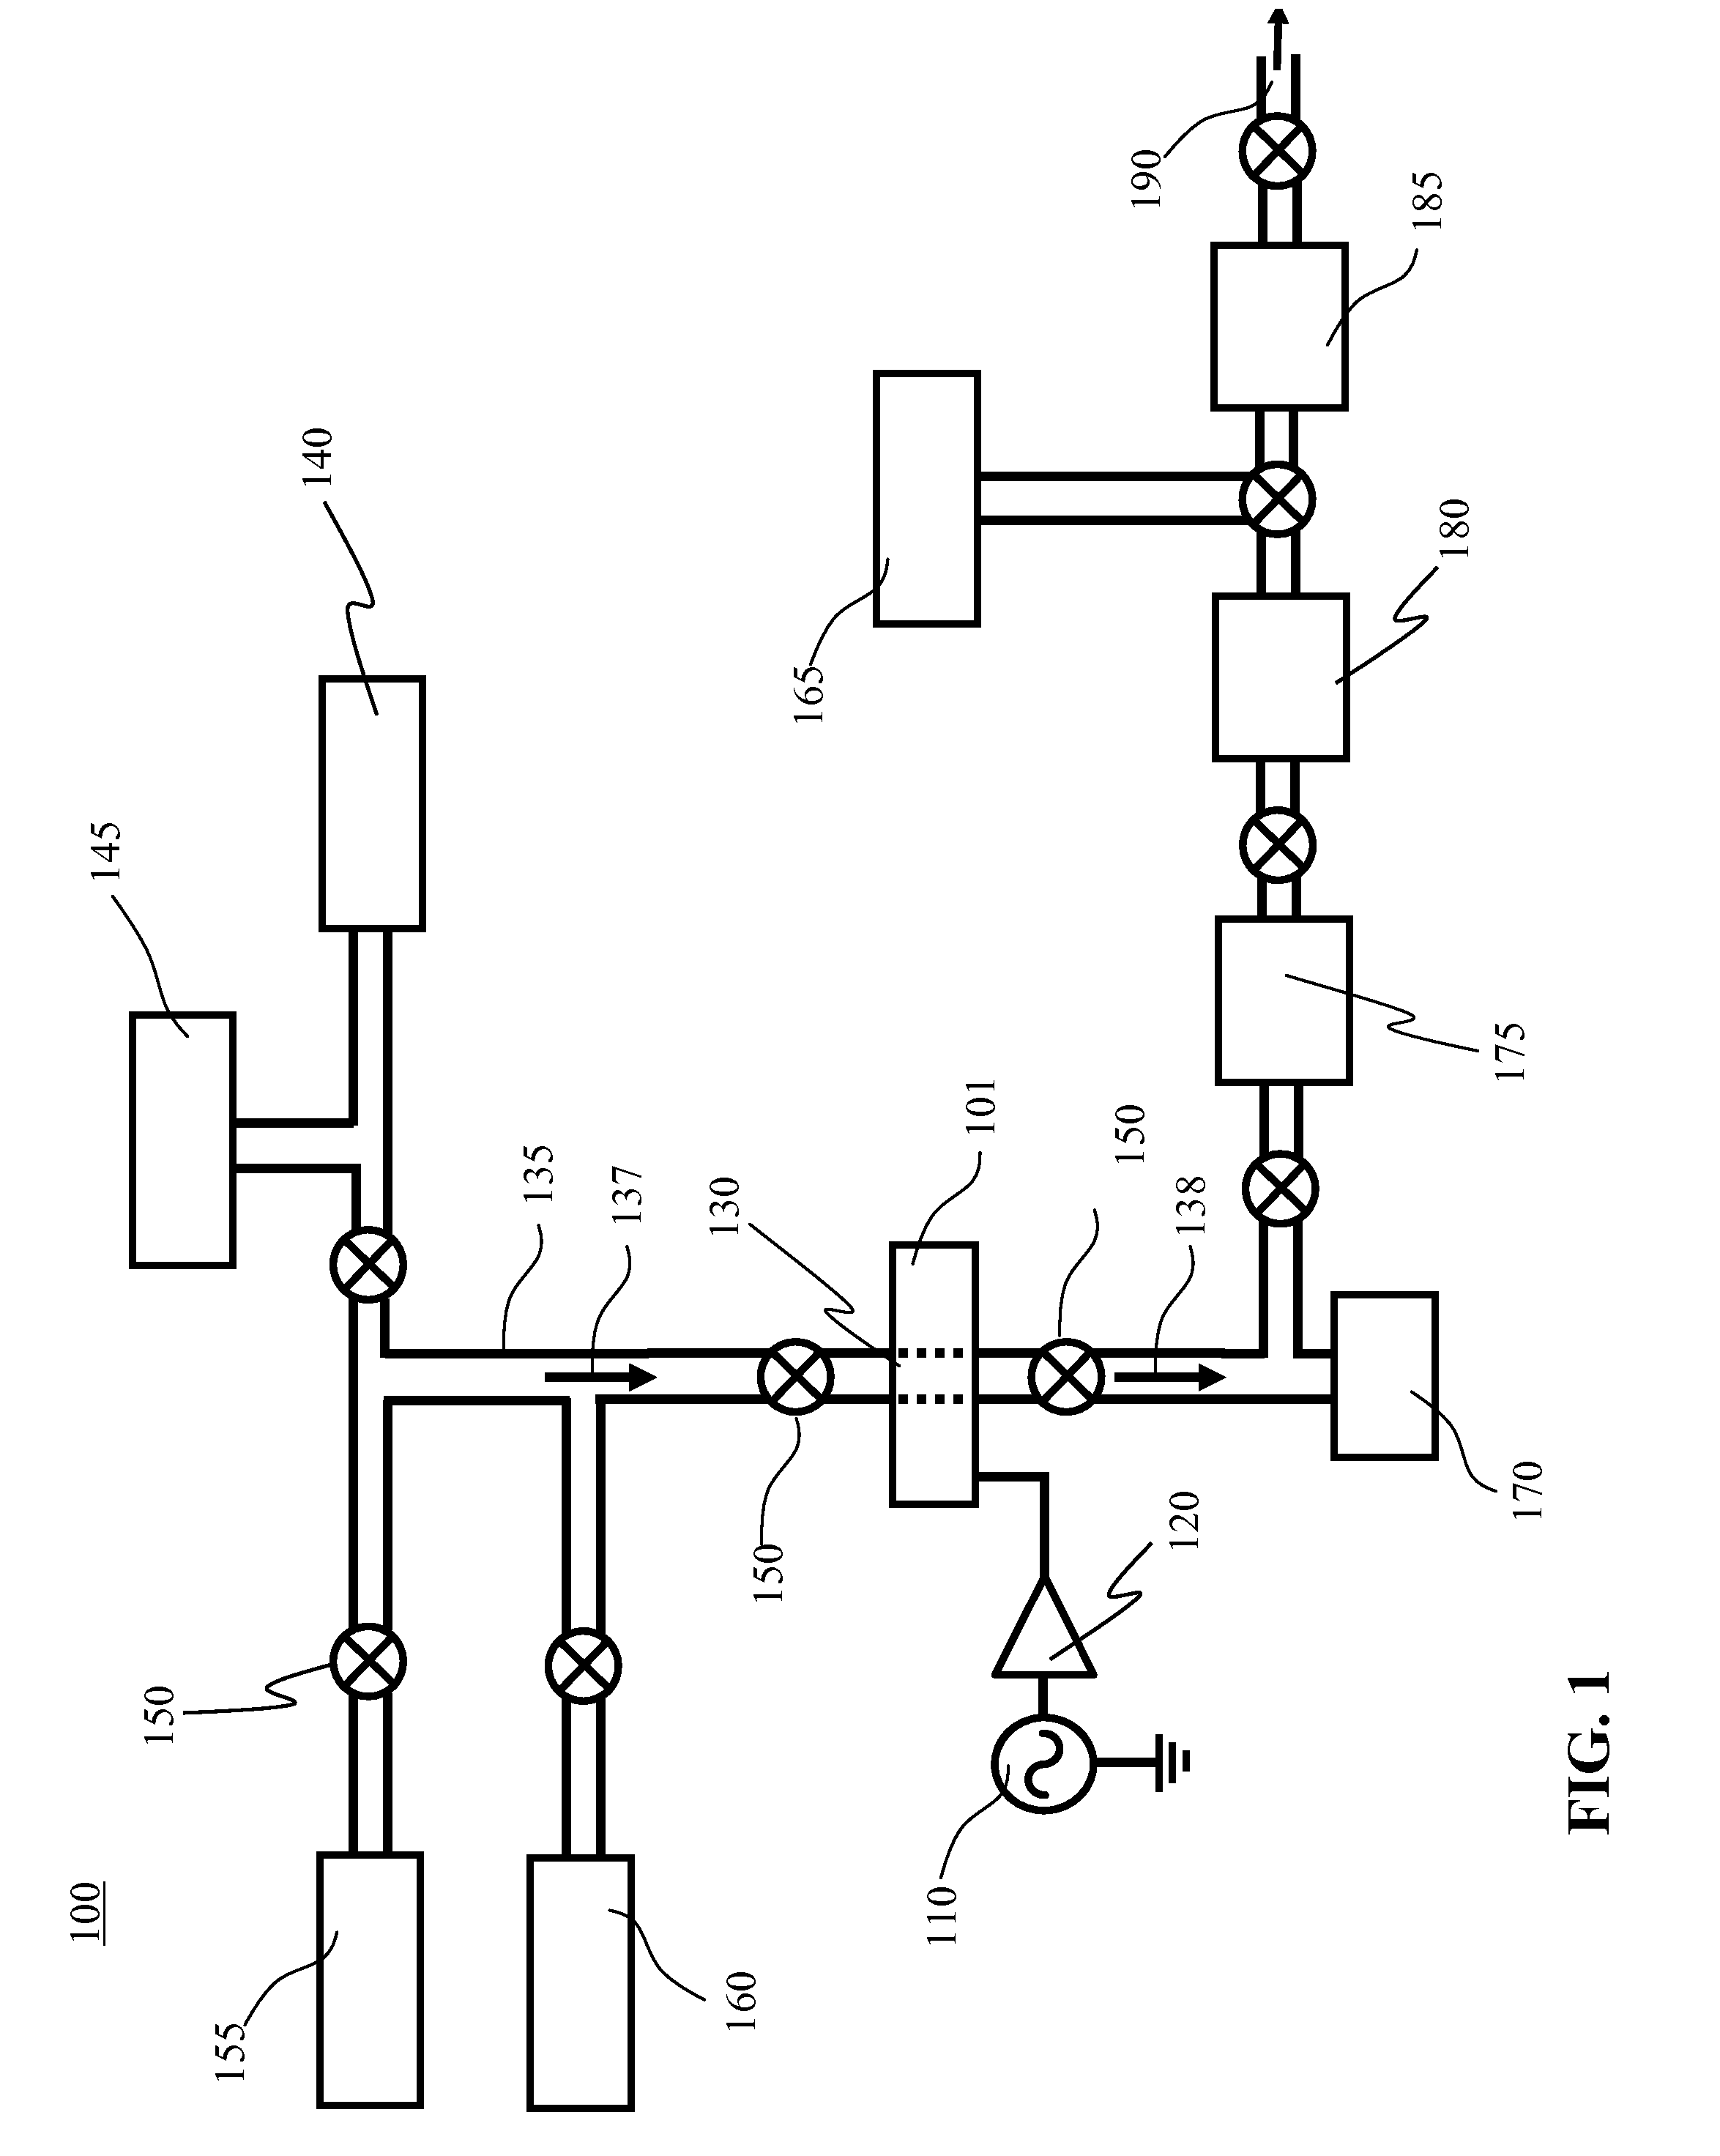 Apparatus and method for reaction of materials using electromagnetic resonators